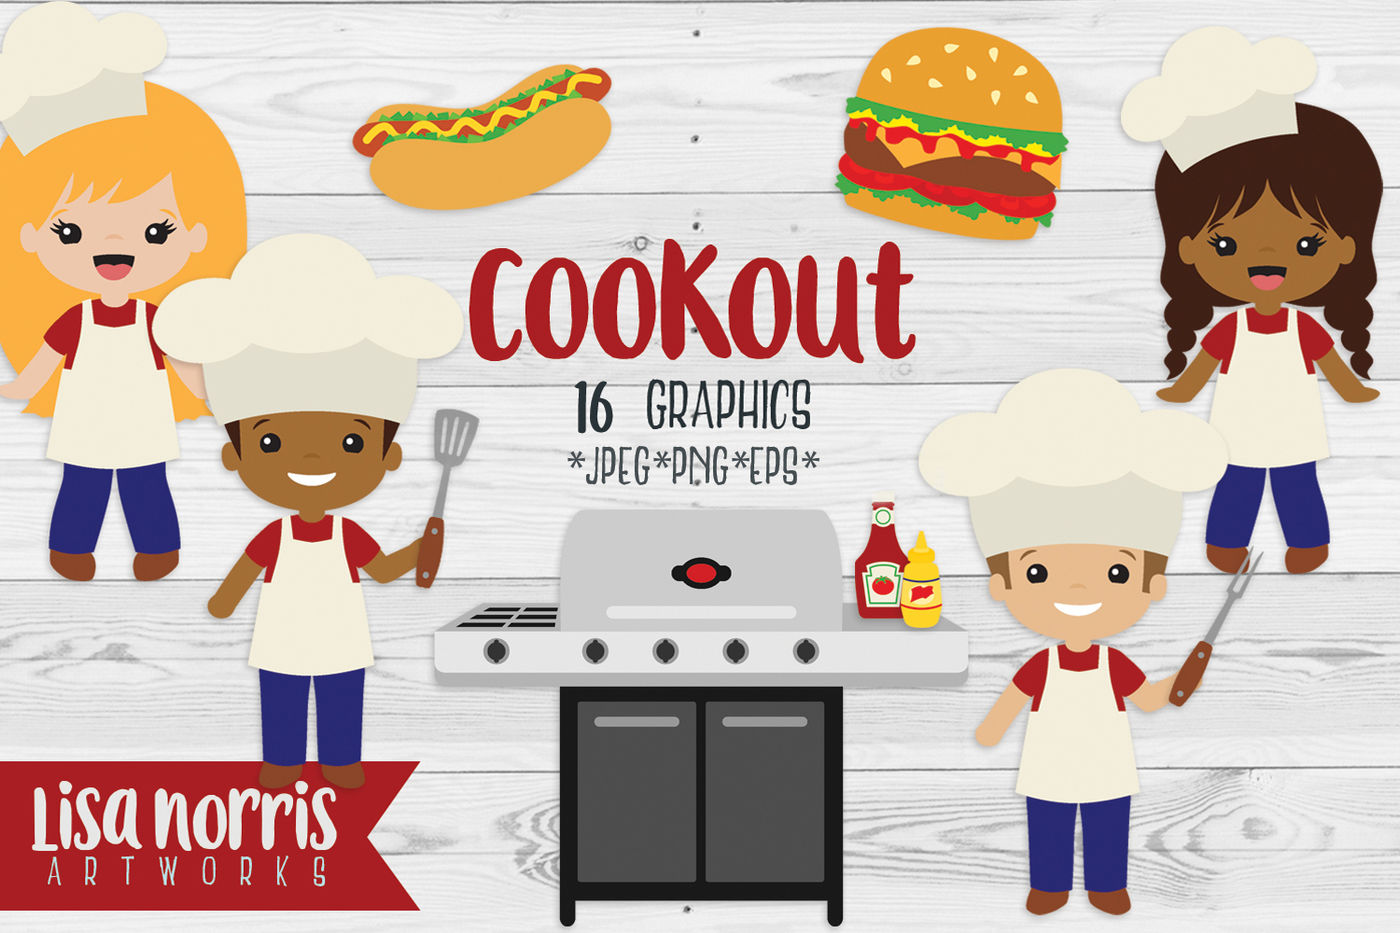 Clip art graphics by. Cookout clipart work